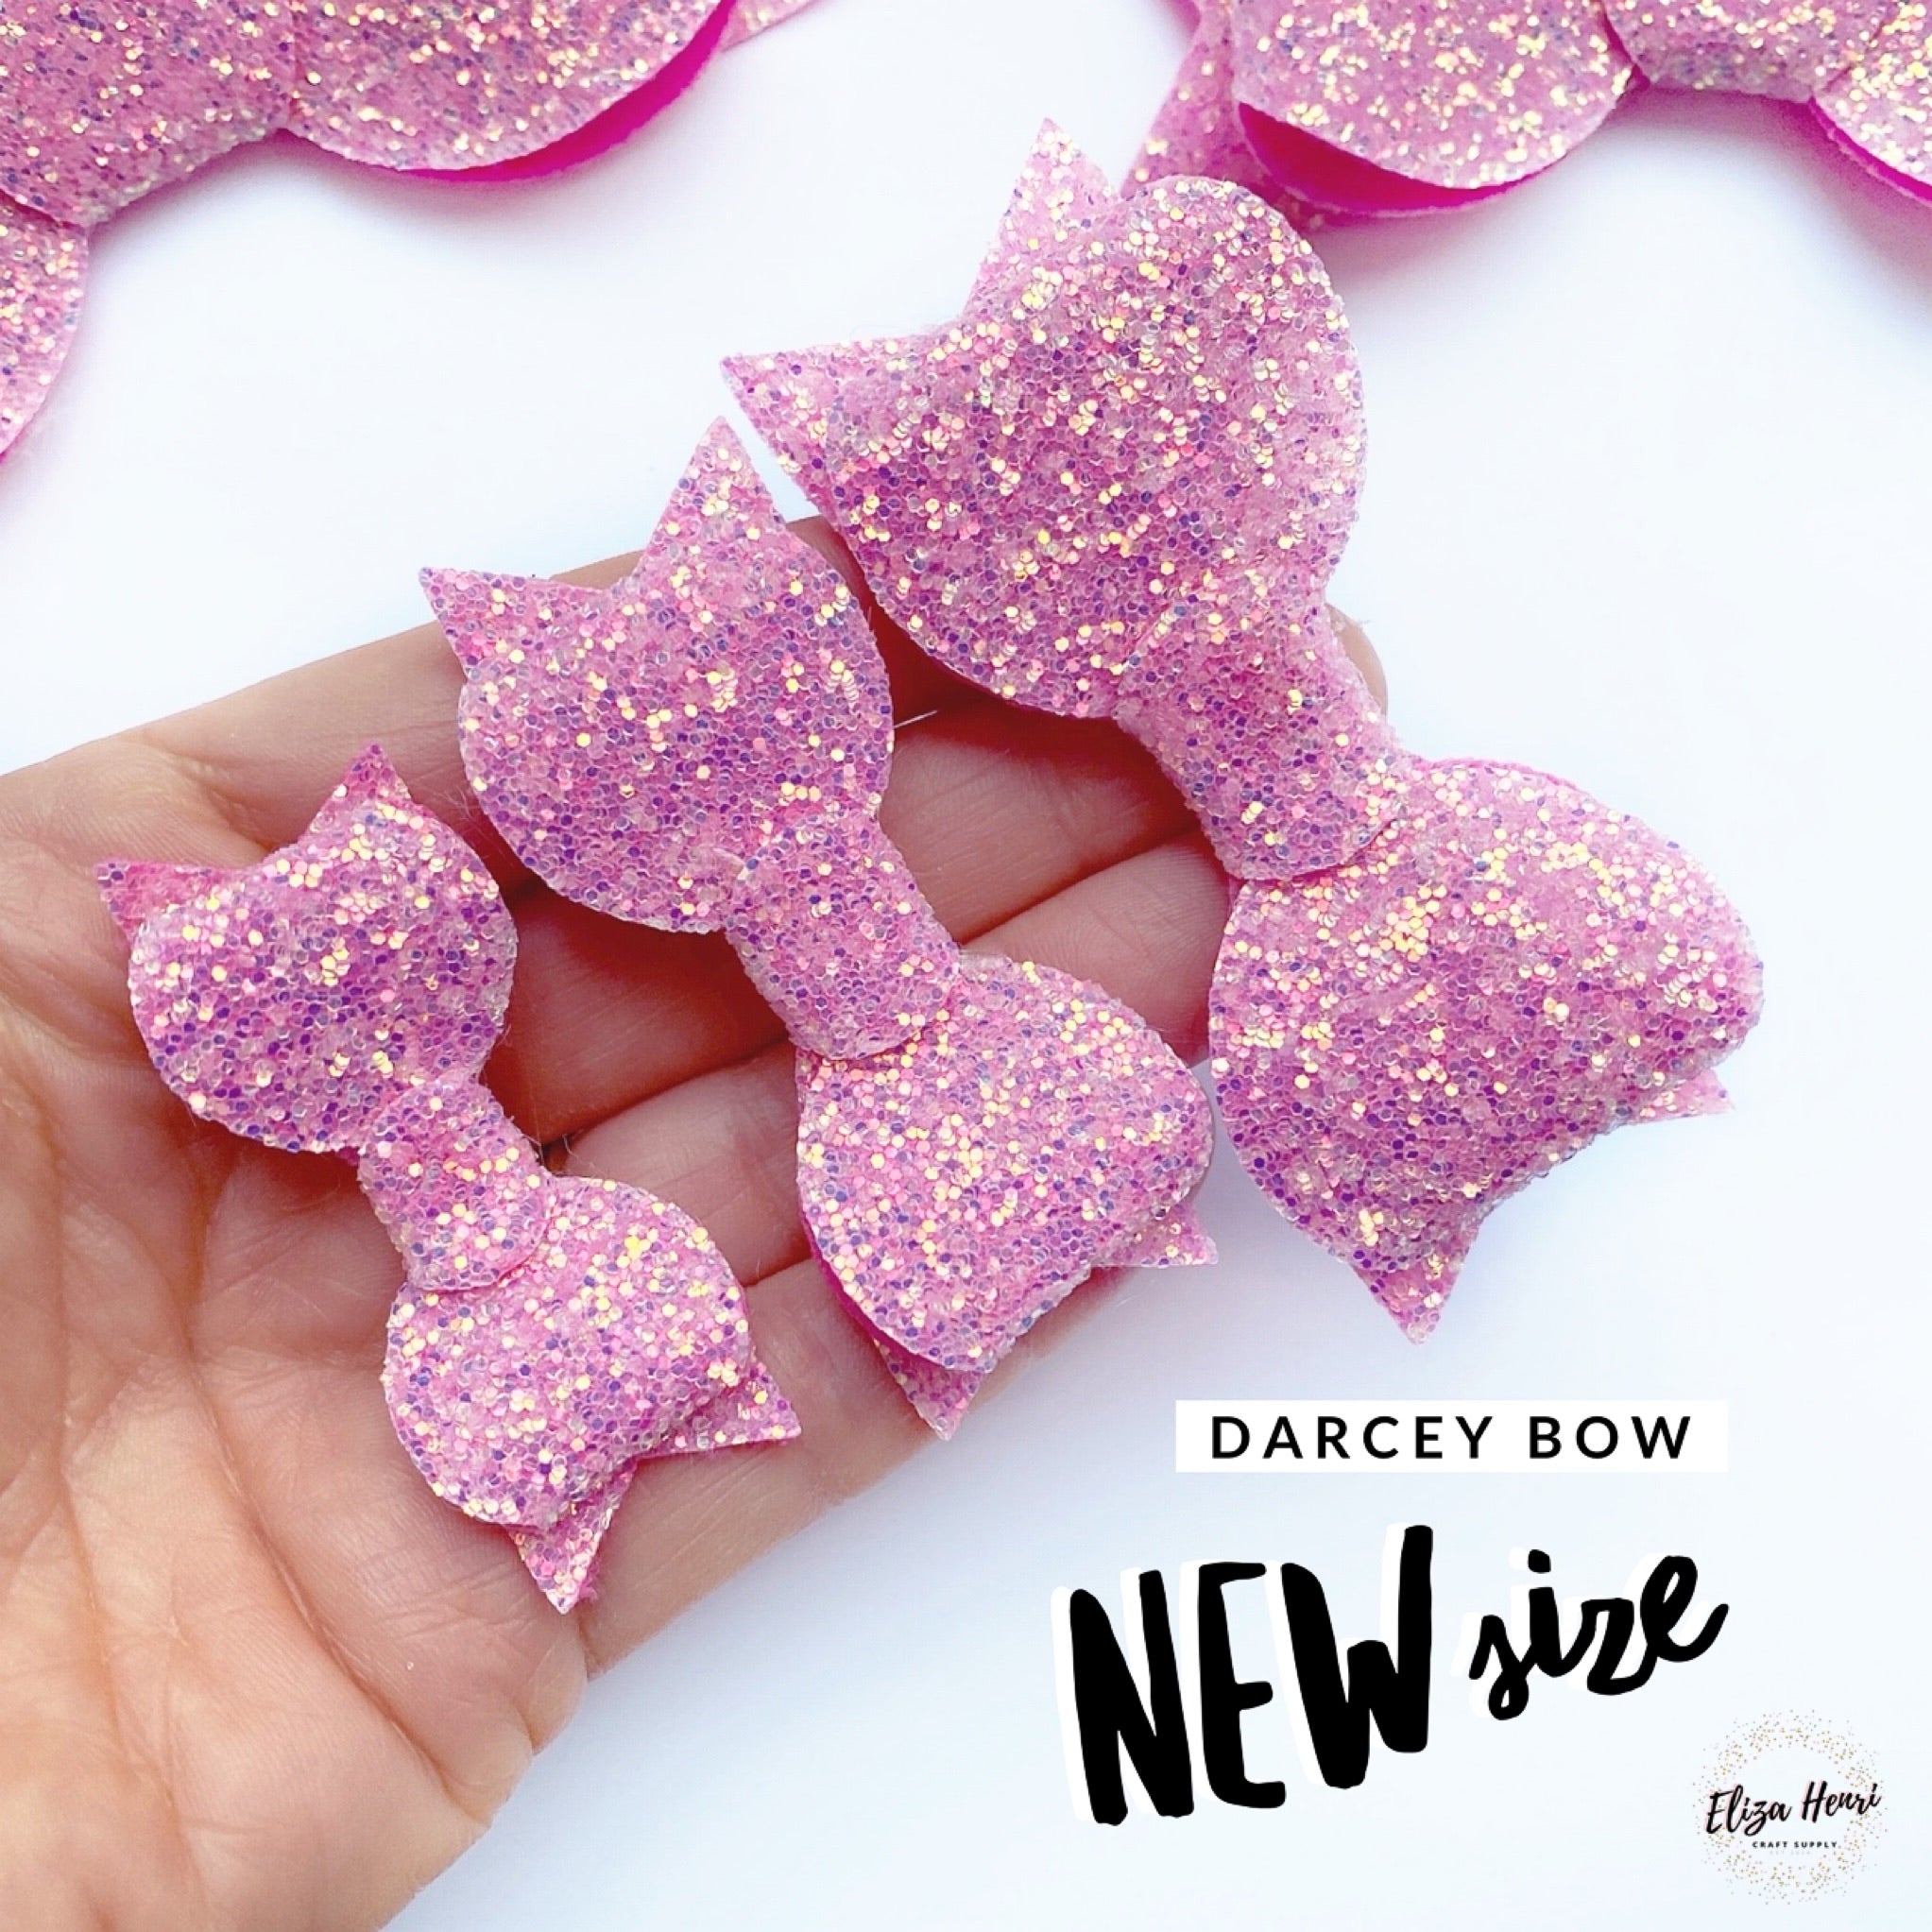 The Darcey Bow EXCLUSIVE Hair Die/Template Compatible with Big Shot - Eliza Henri Craft Supply